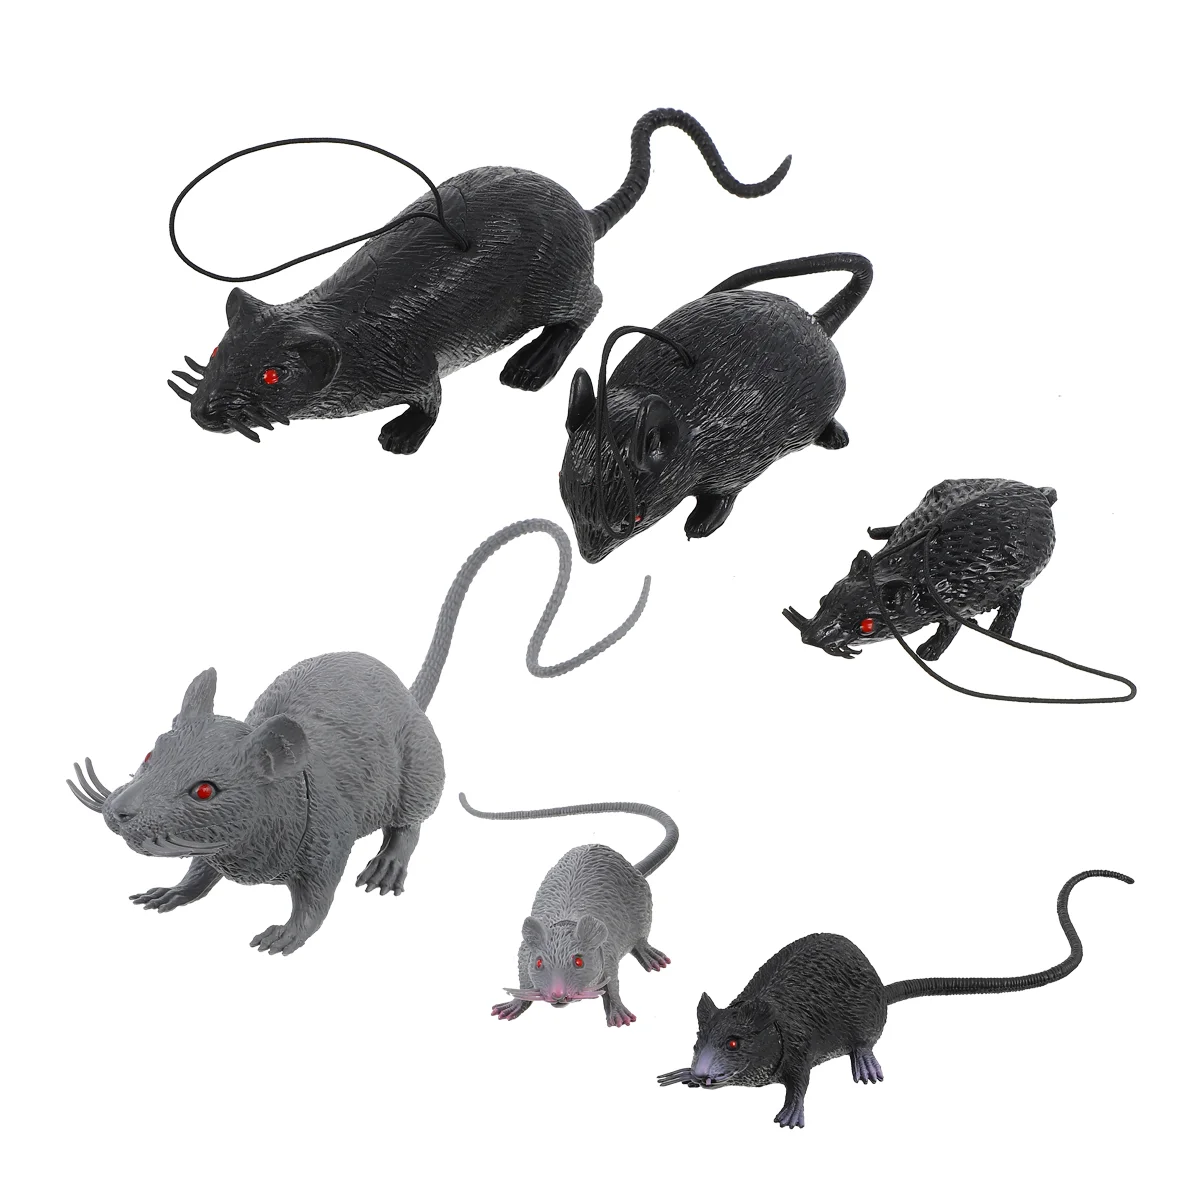 

6Pcs Halloween Artificial Mice Prank Toy Fake Mouse Model Simulationo Mouse